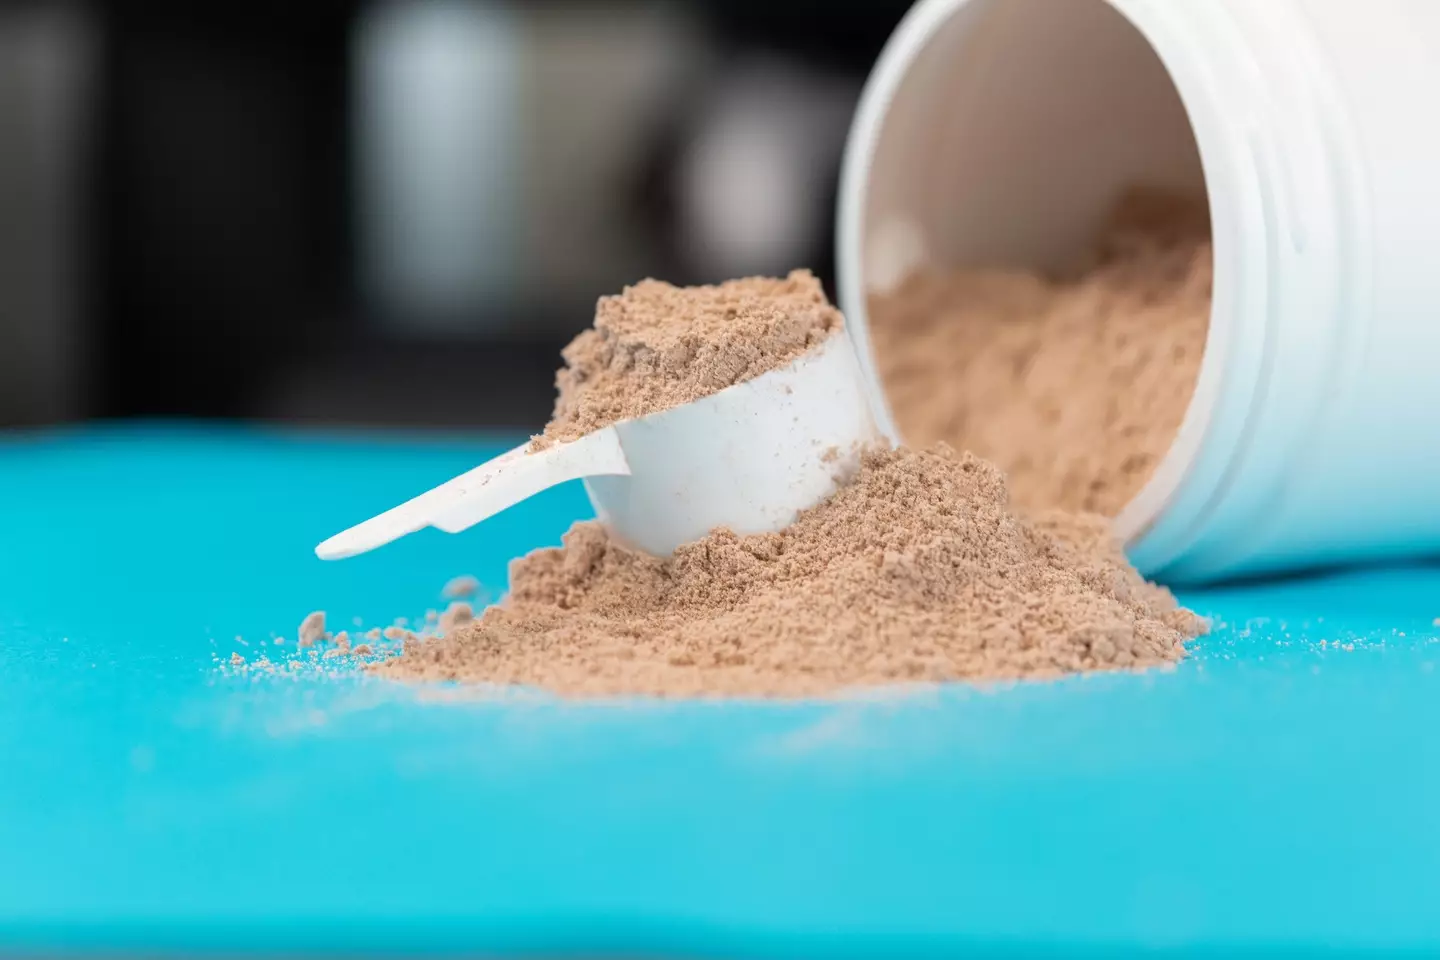 People have been disgusted after seeing a method of making protein powder.